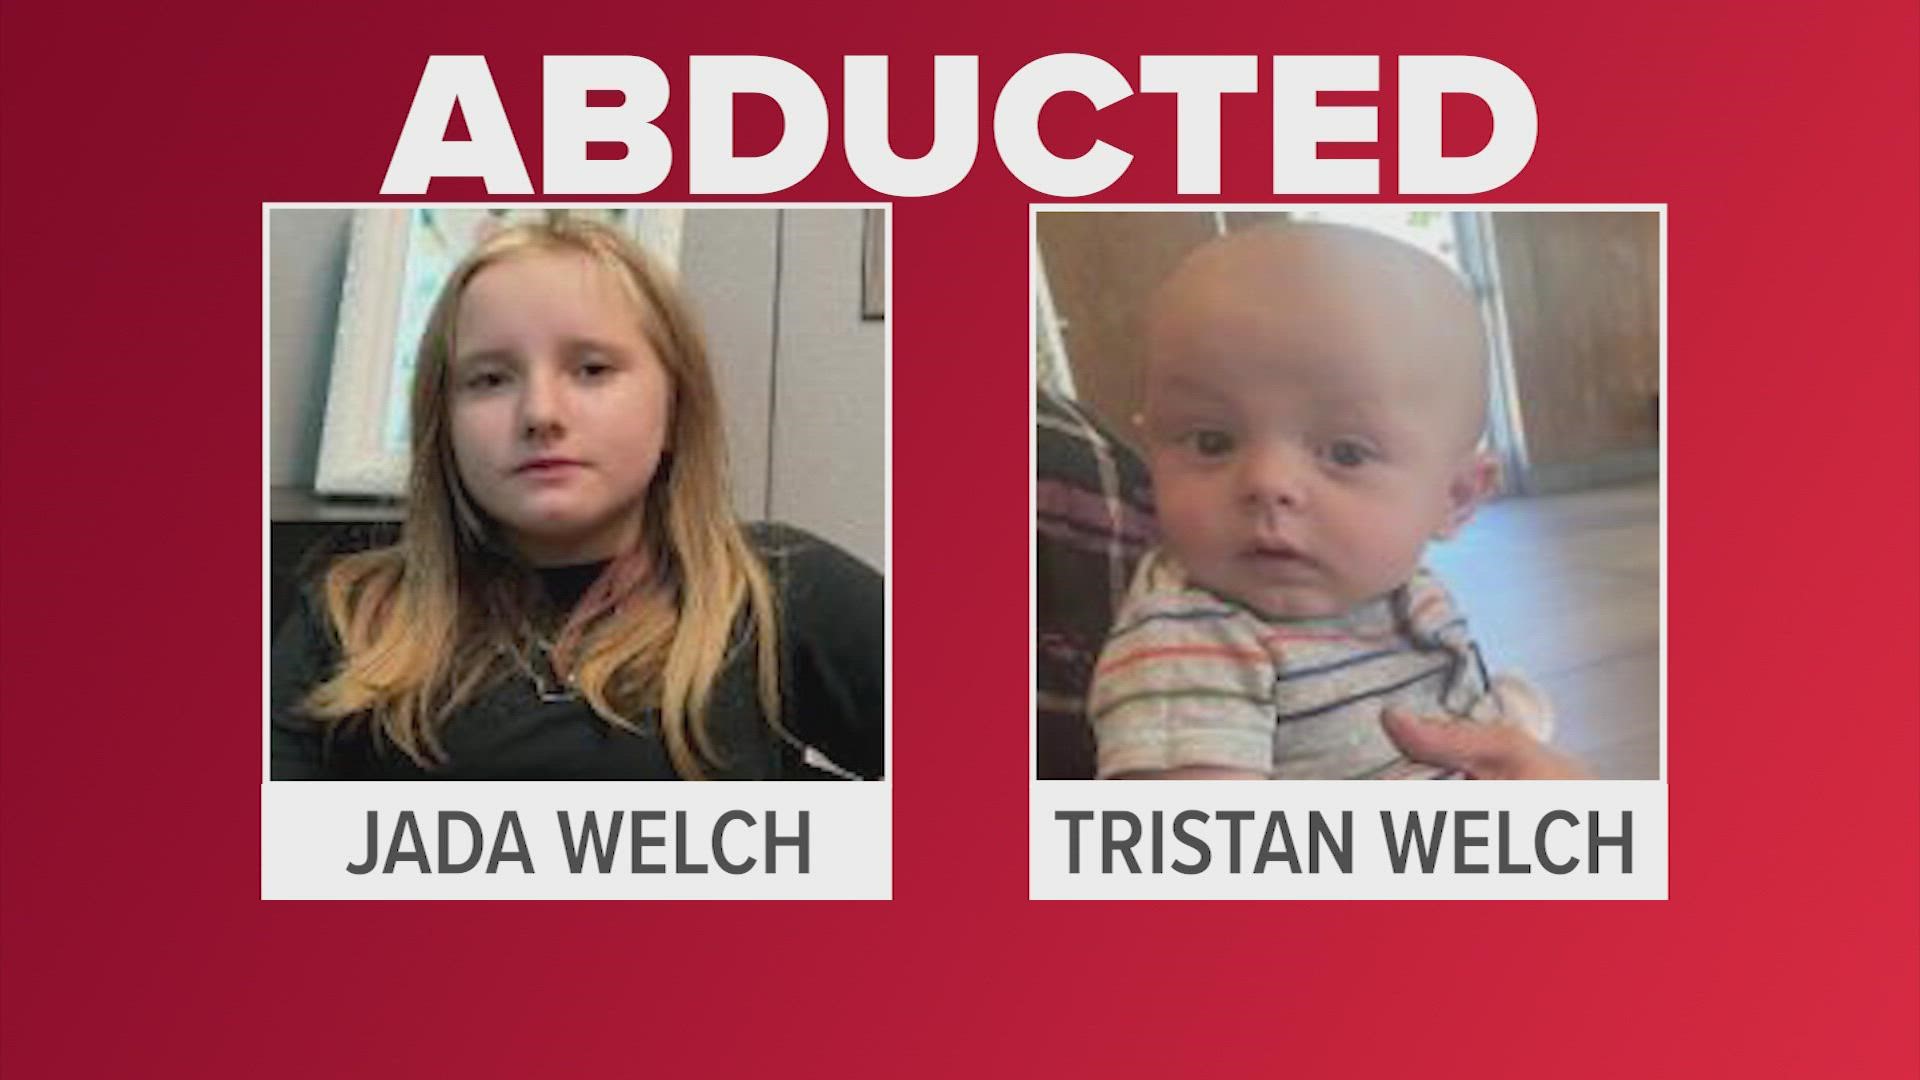 The two children from Midlothian are believed to be with two adults. If you see them, you're asked to call police.